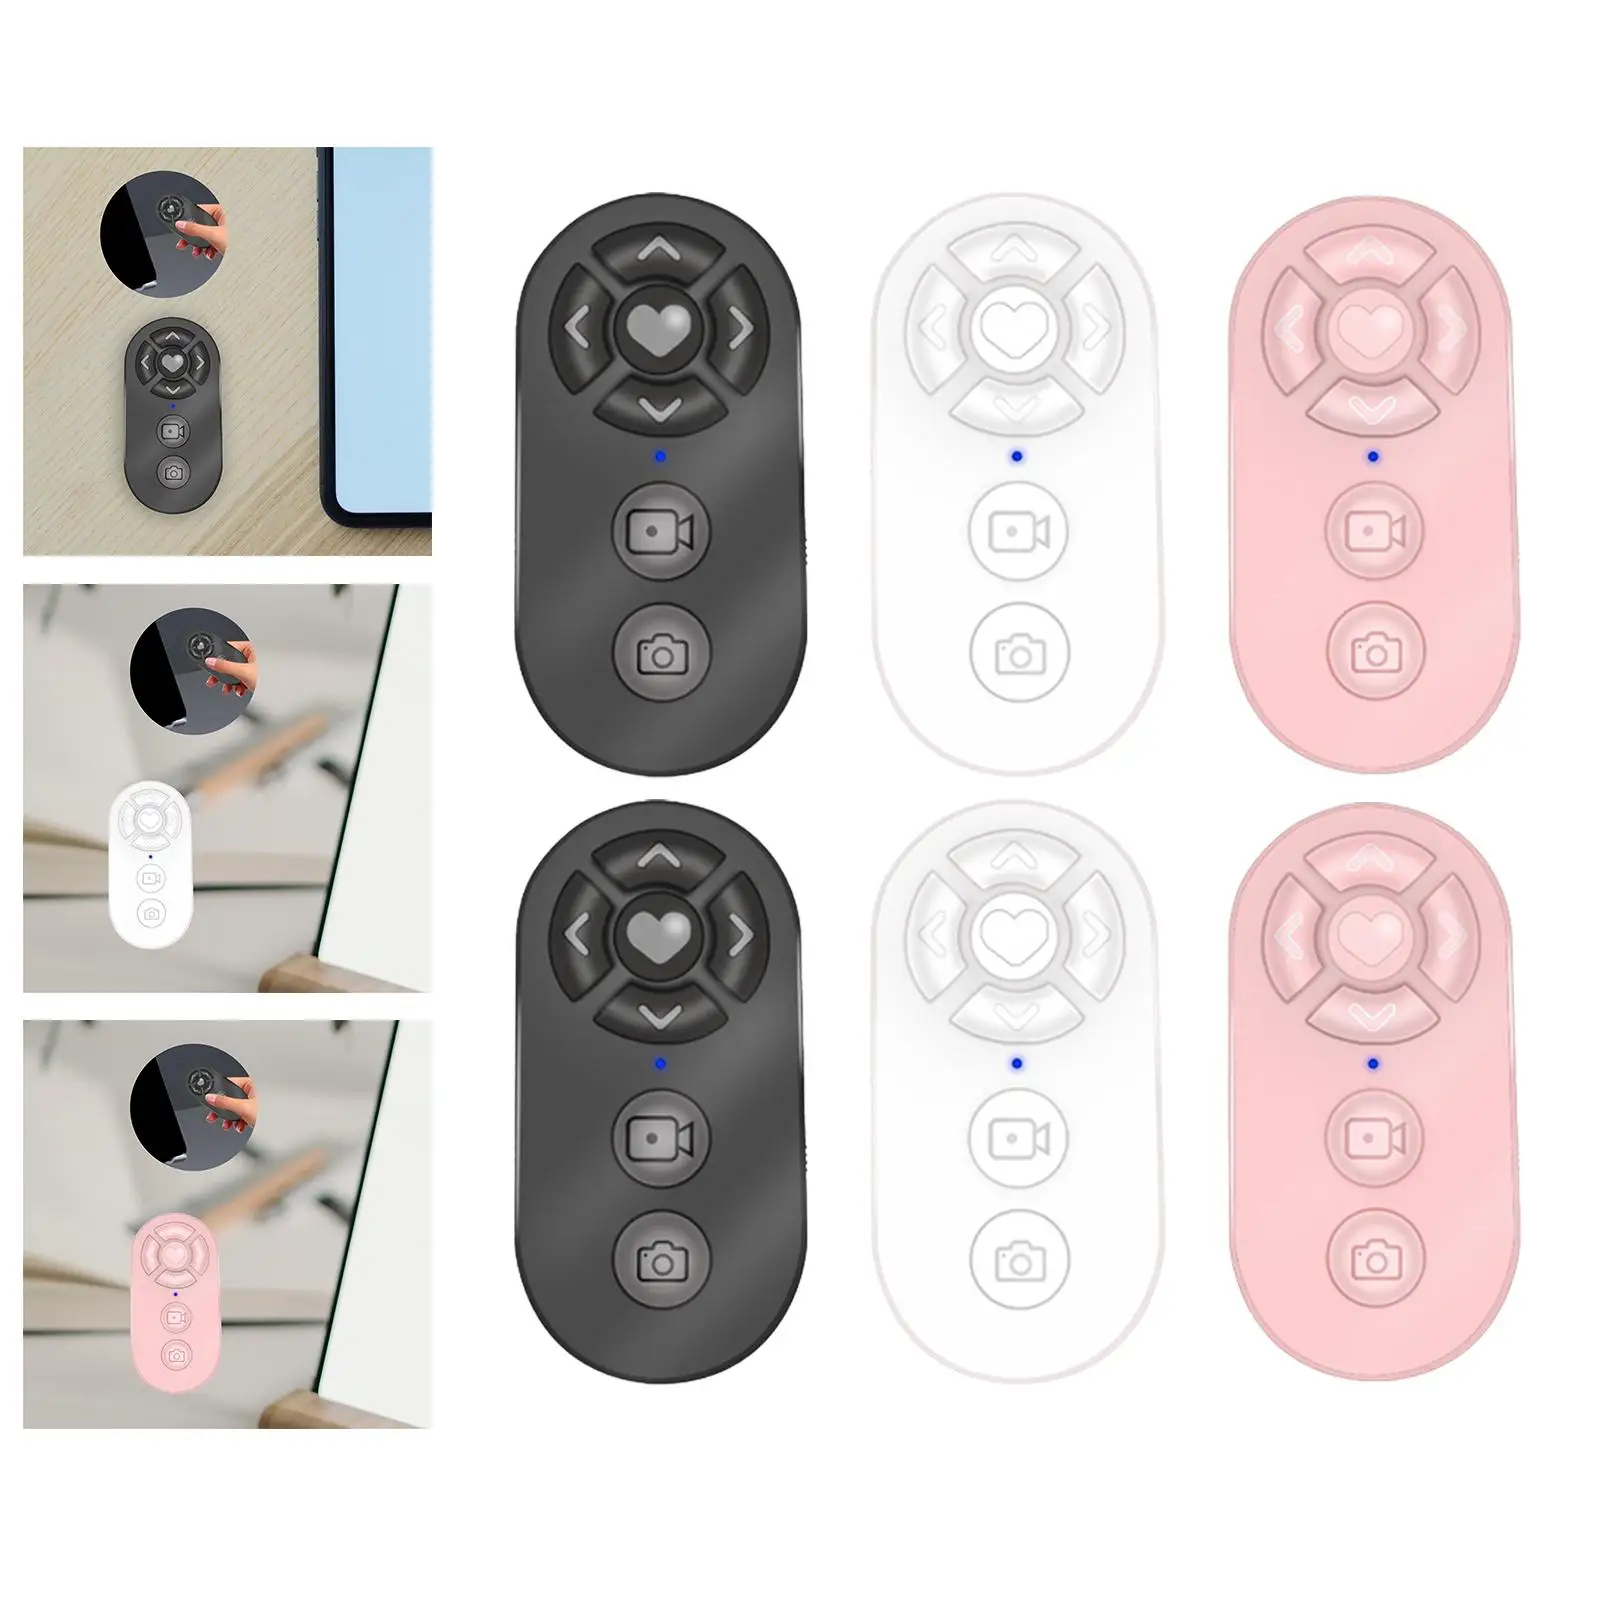 Phone App Page Turner Bluetooth Remote Control Wireless Remote Selfie Battery Operated for Smartphones Selfie Convenient Sturdy